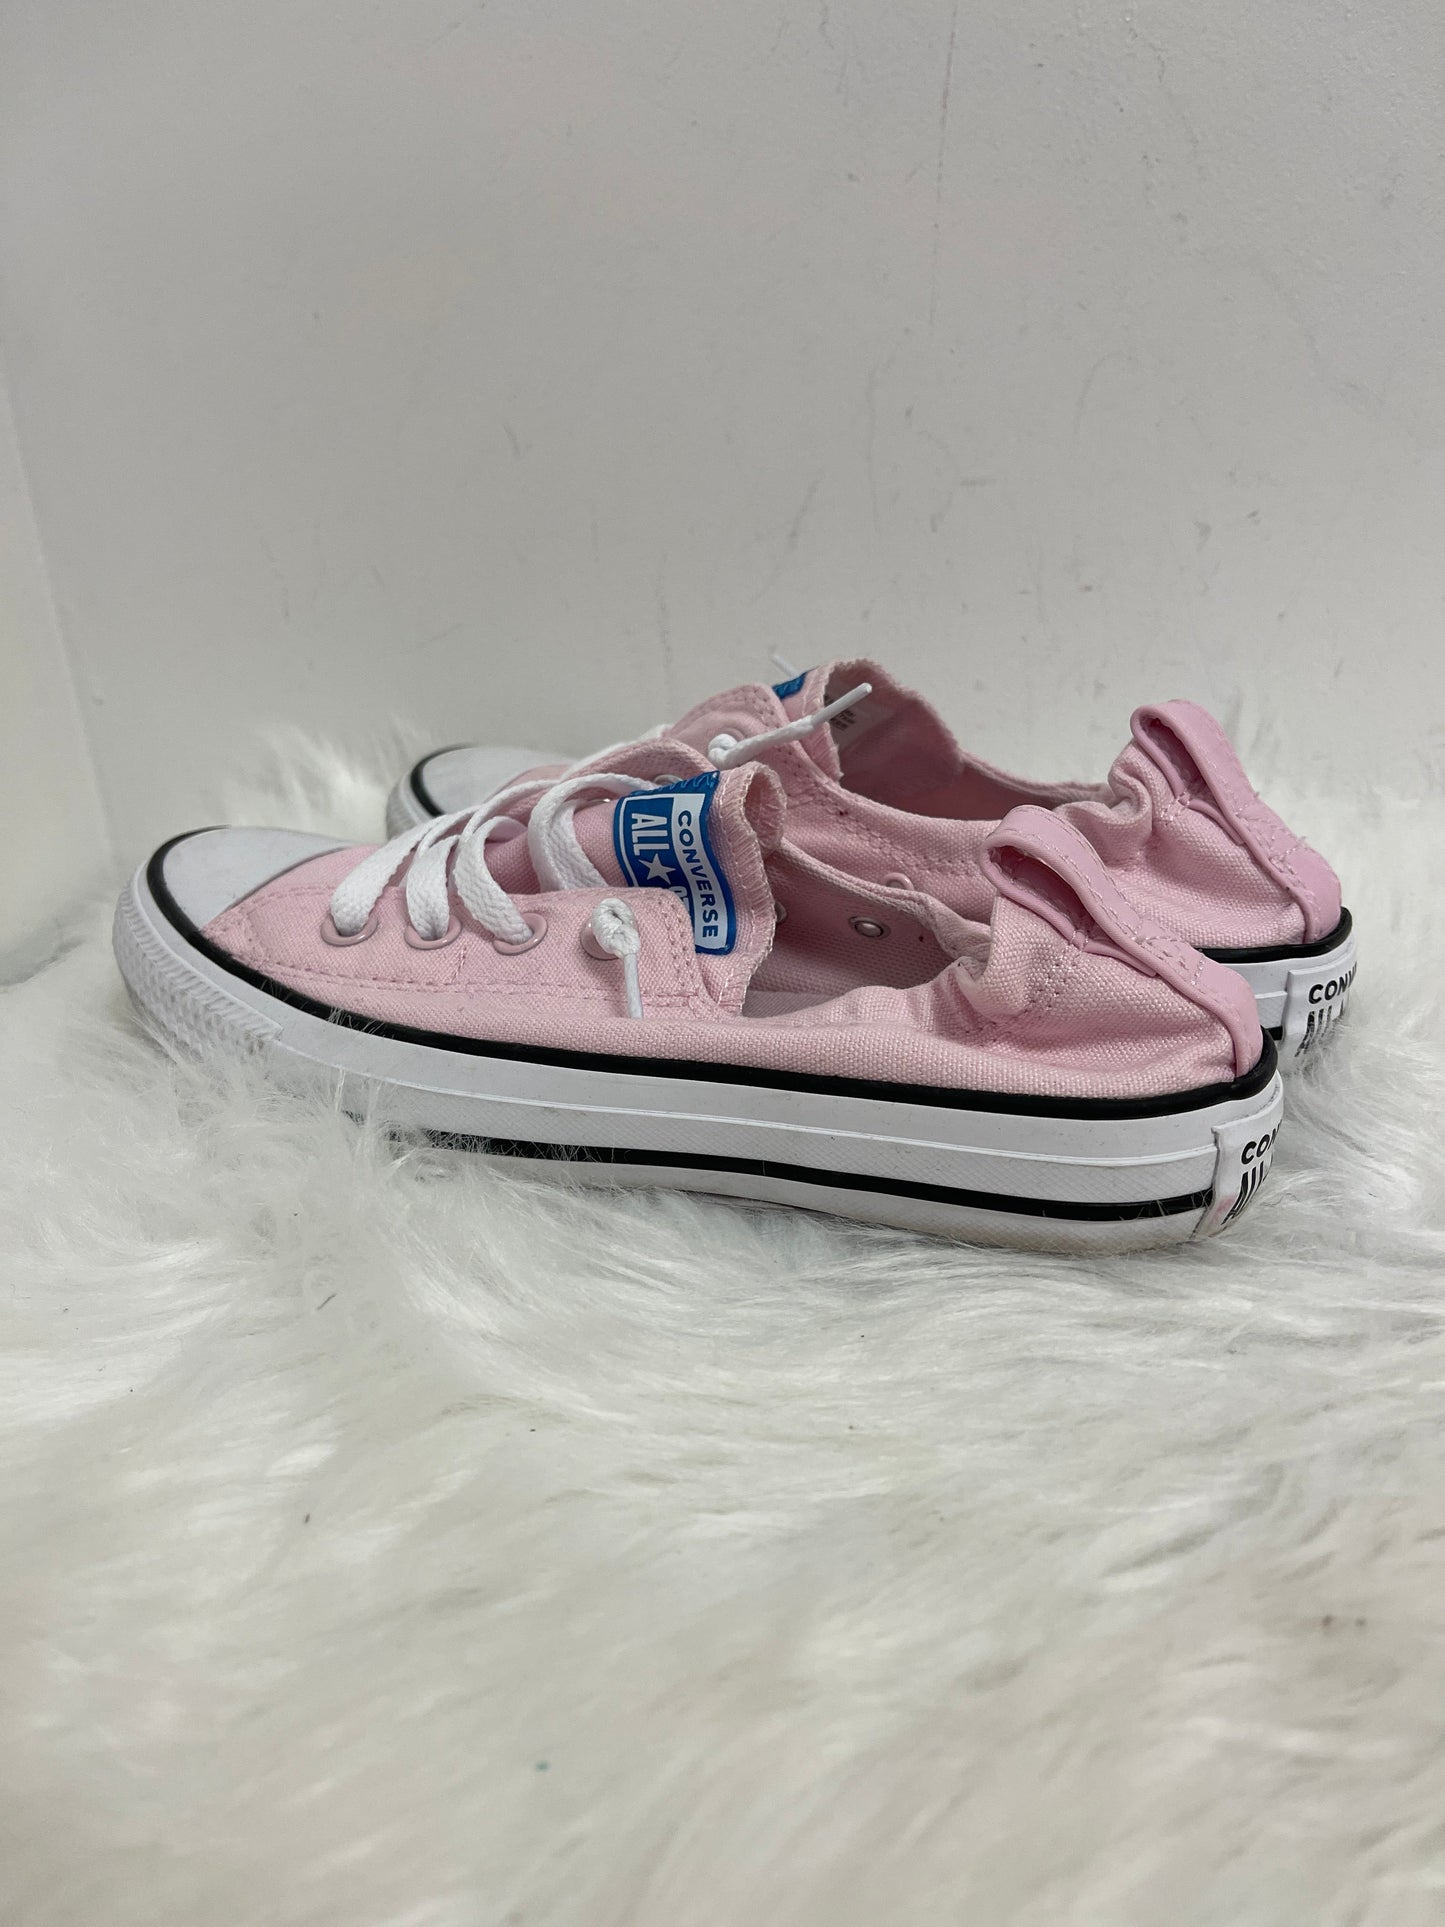 Pink Shoes Sneakers Converse, Size 7